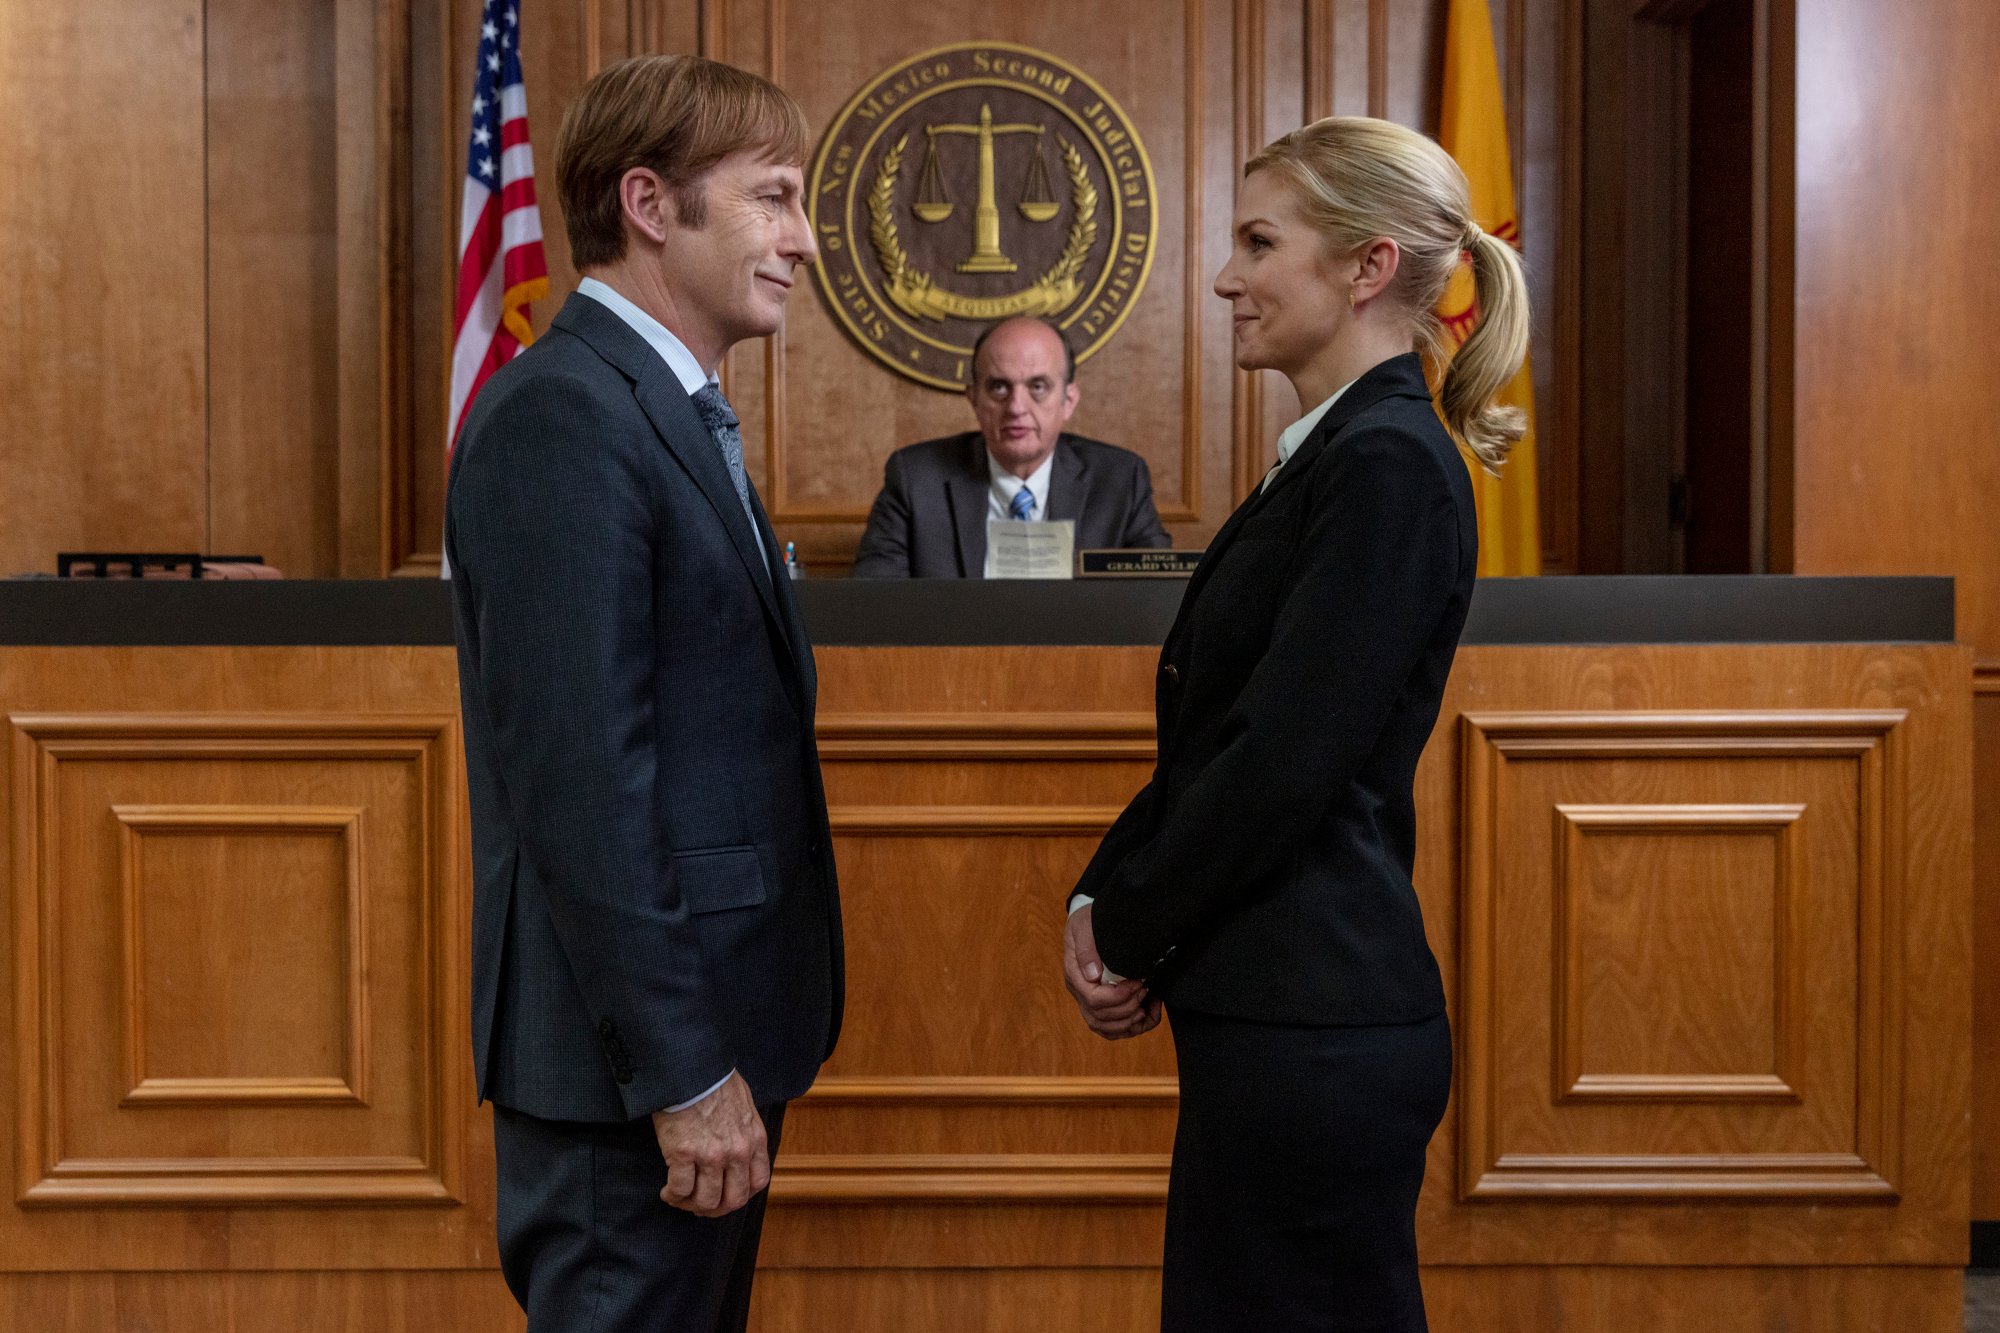 Bob Odenkirk and Rhea Seehorn as Jimmy McGill and Kim Wexler in 'Better Call Saul' Season 5. They're standing before a judge and getting married. They're both wearing dark suits and facing one another.